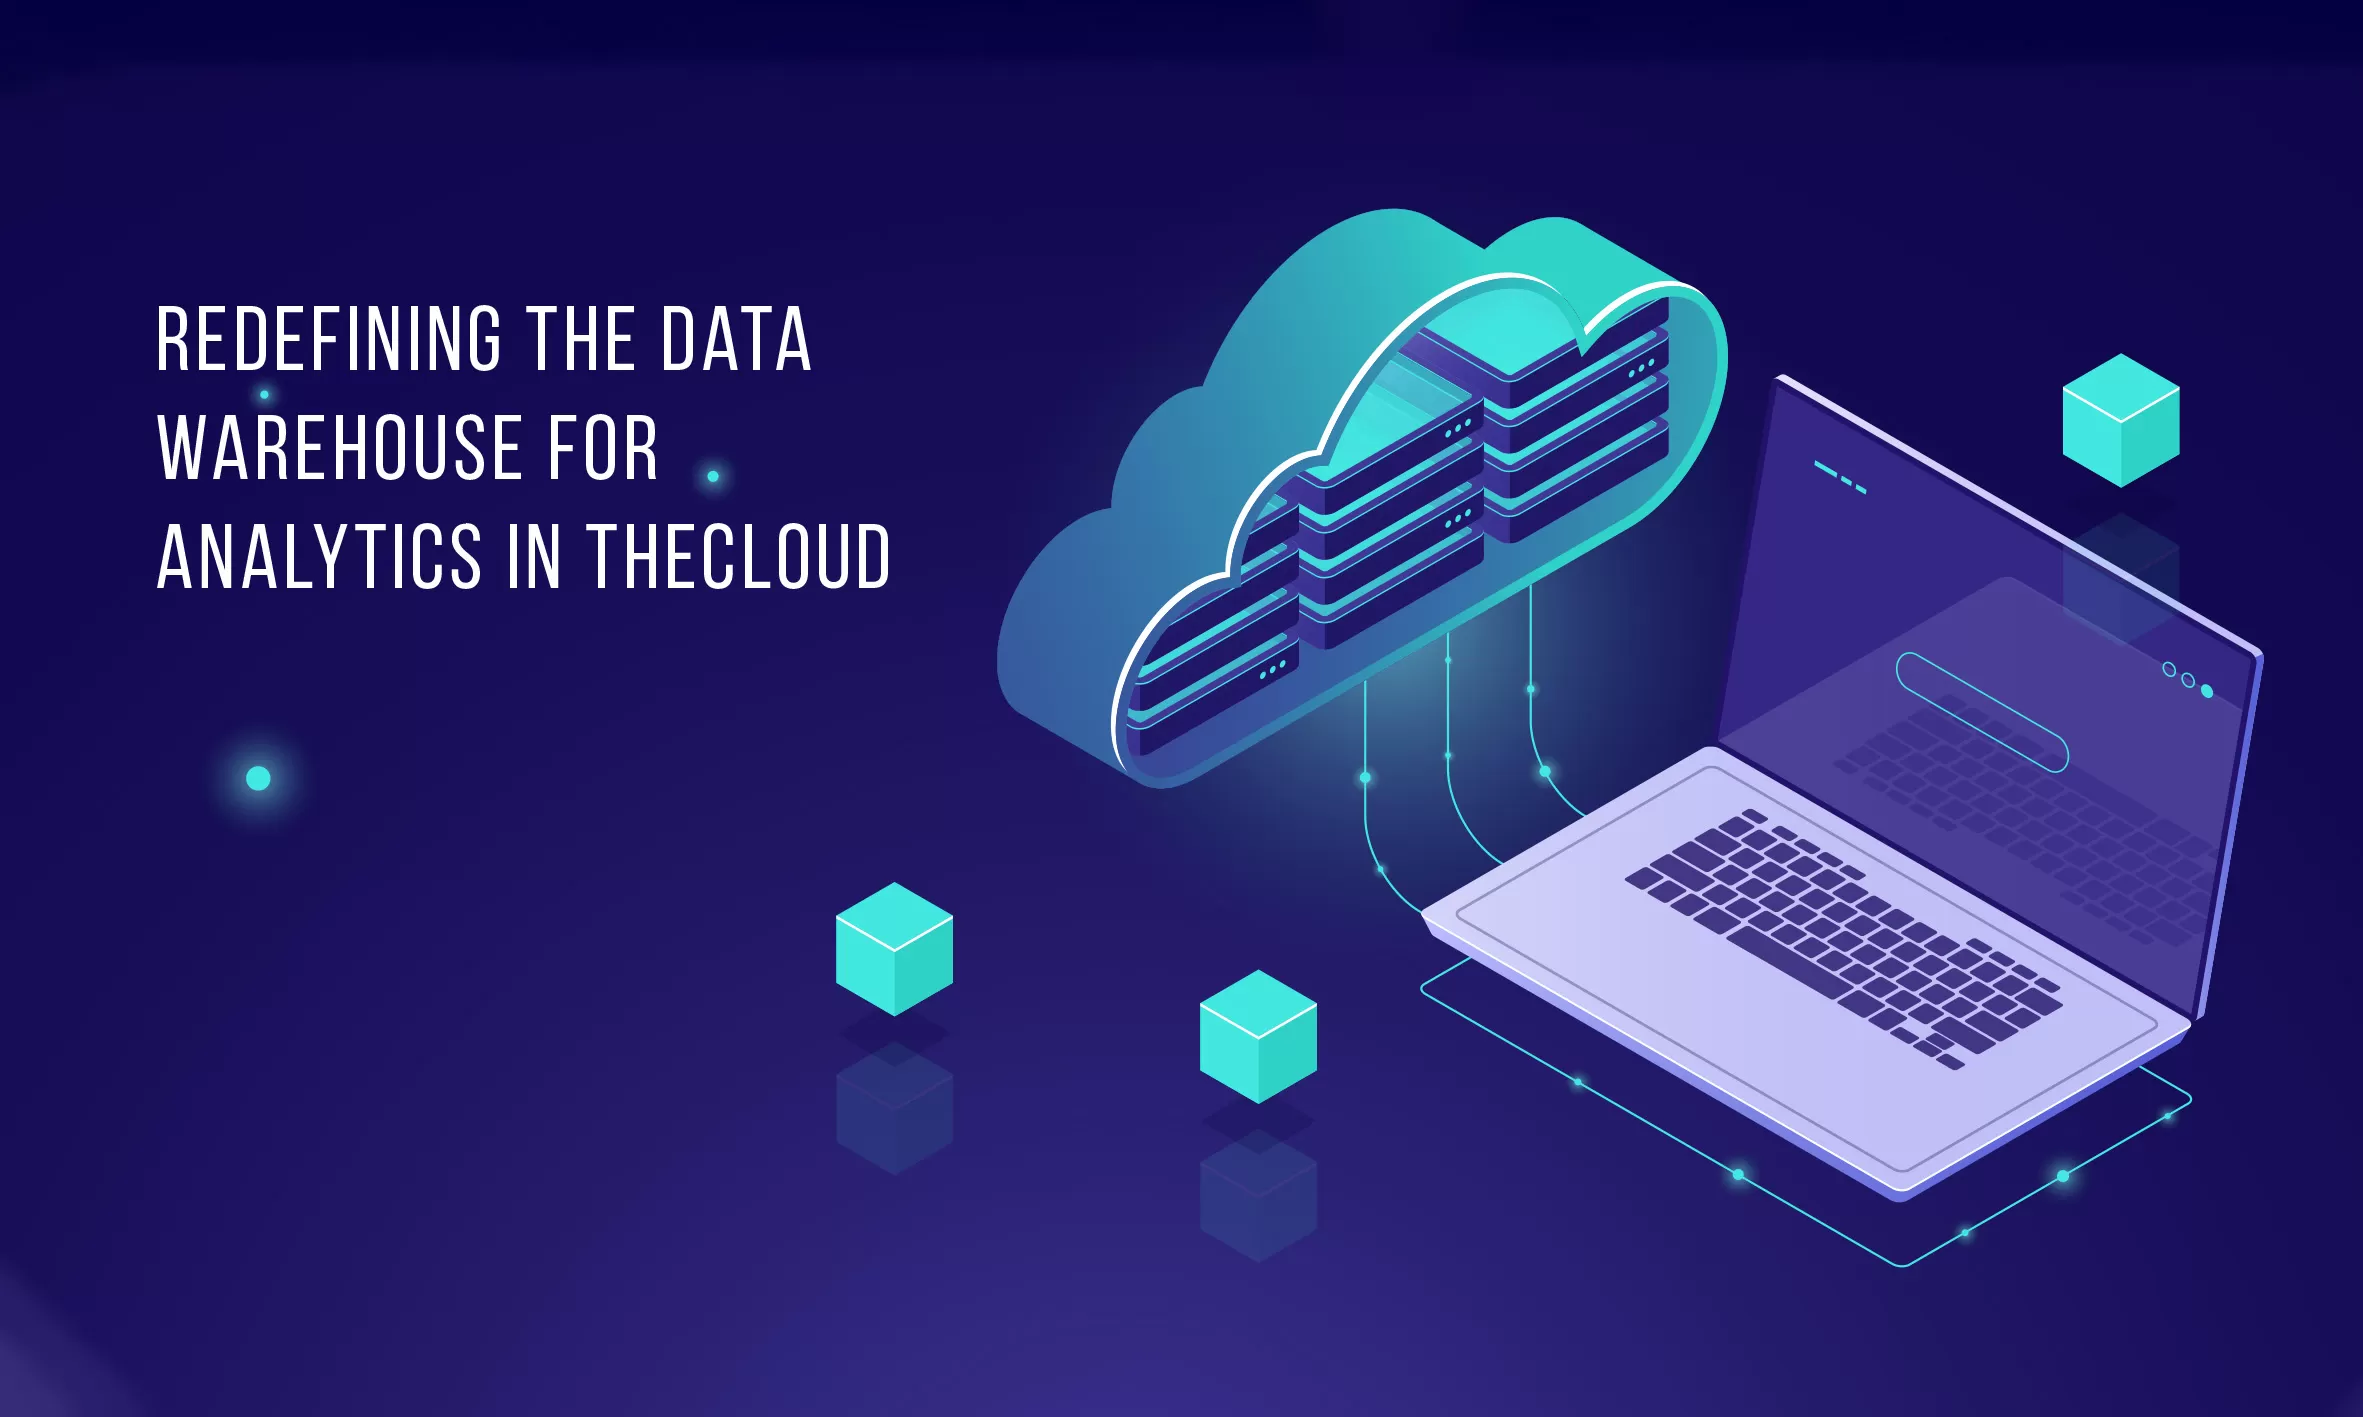 Redefining the Data Warehouse for Analytics in the Cloud